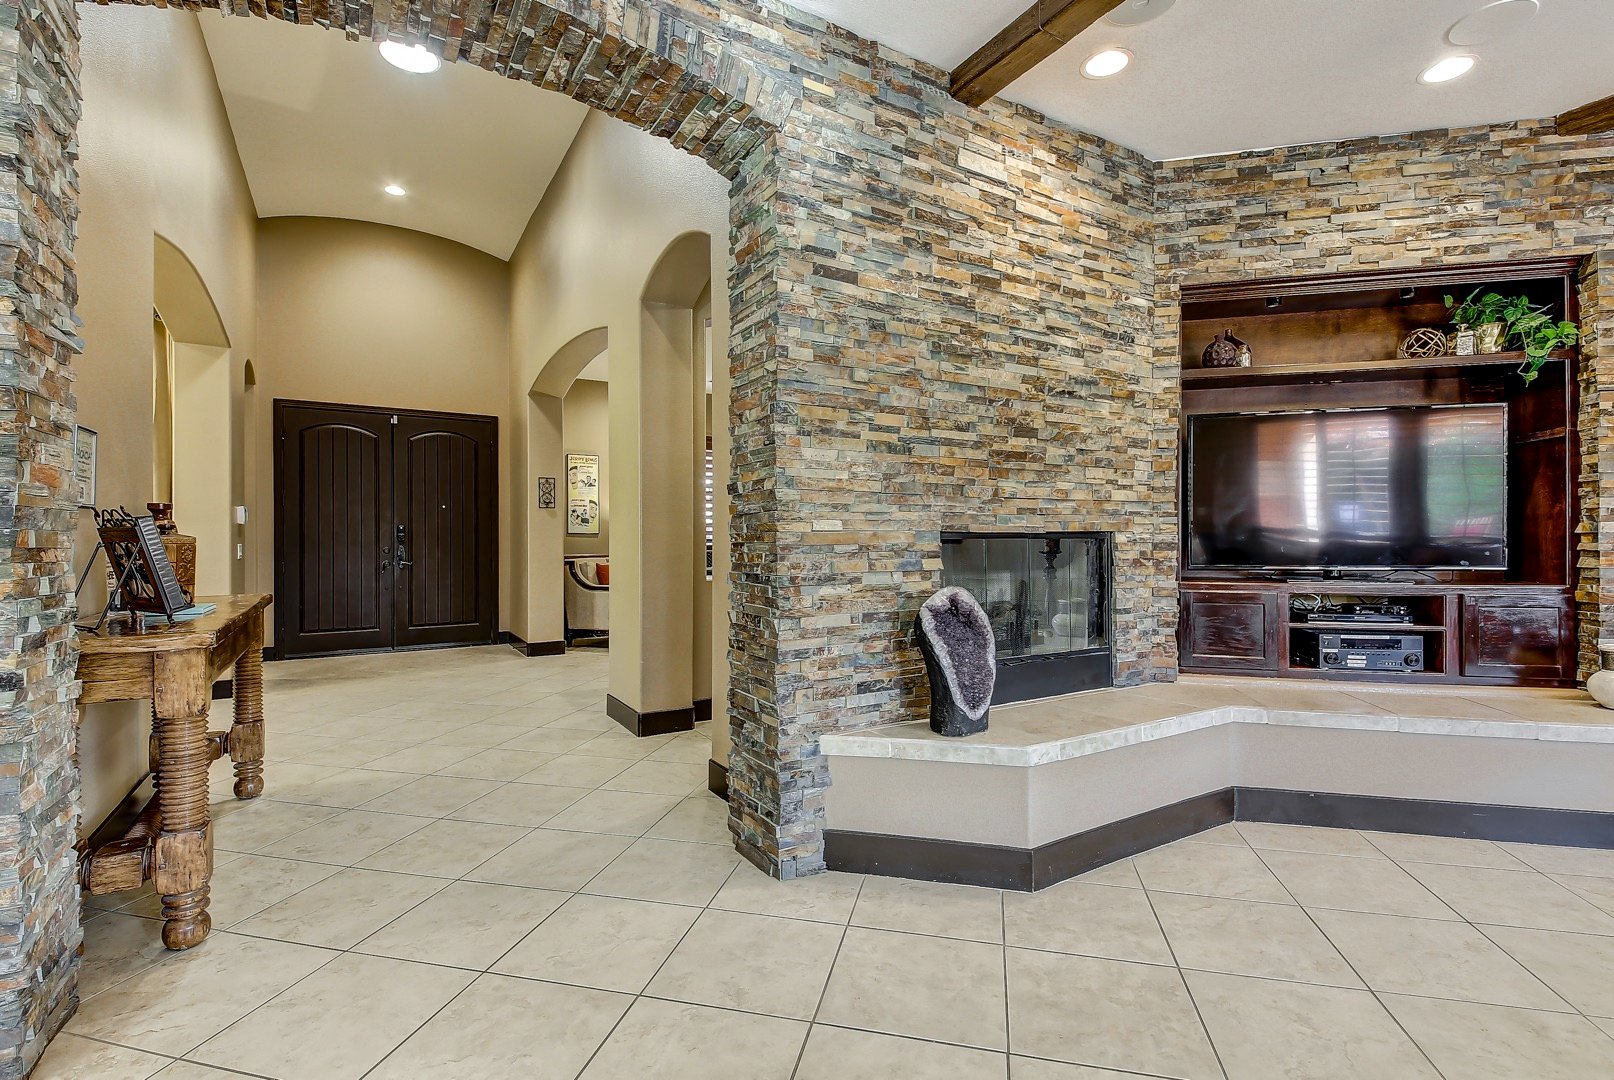 Custom stone walls and entryway with 10 ft ceilings throughout the house.